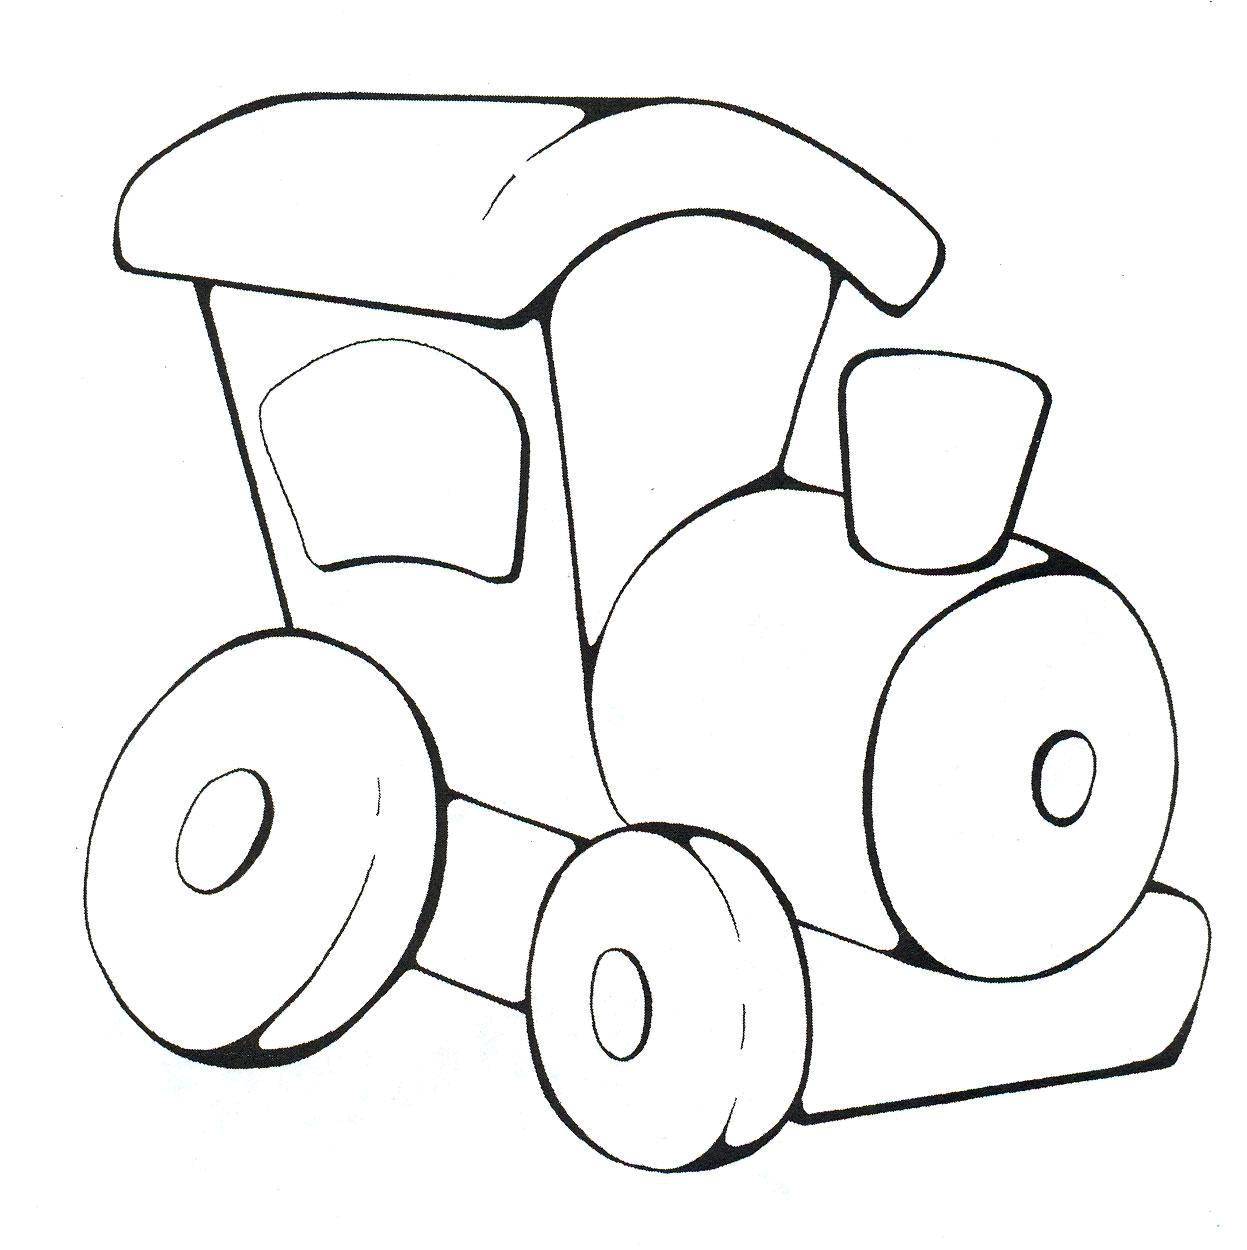 Coloring Little engine that could. Category little ones. Tags:  Locomotive.